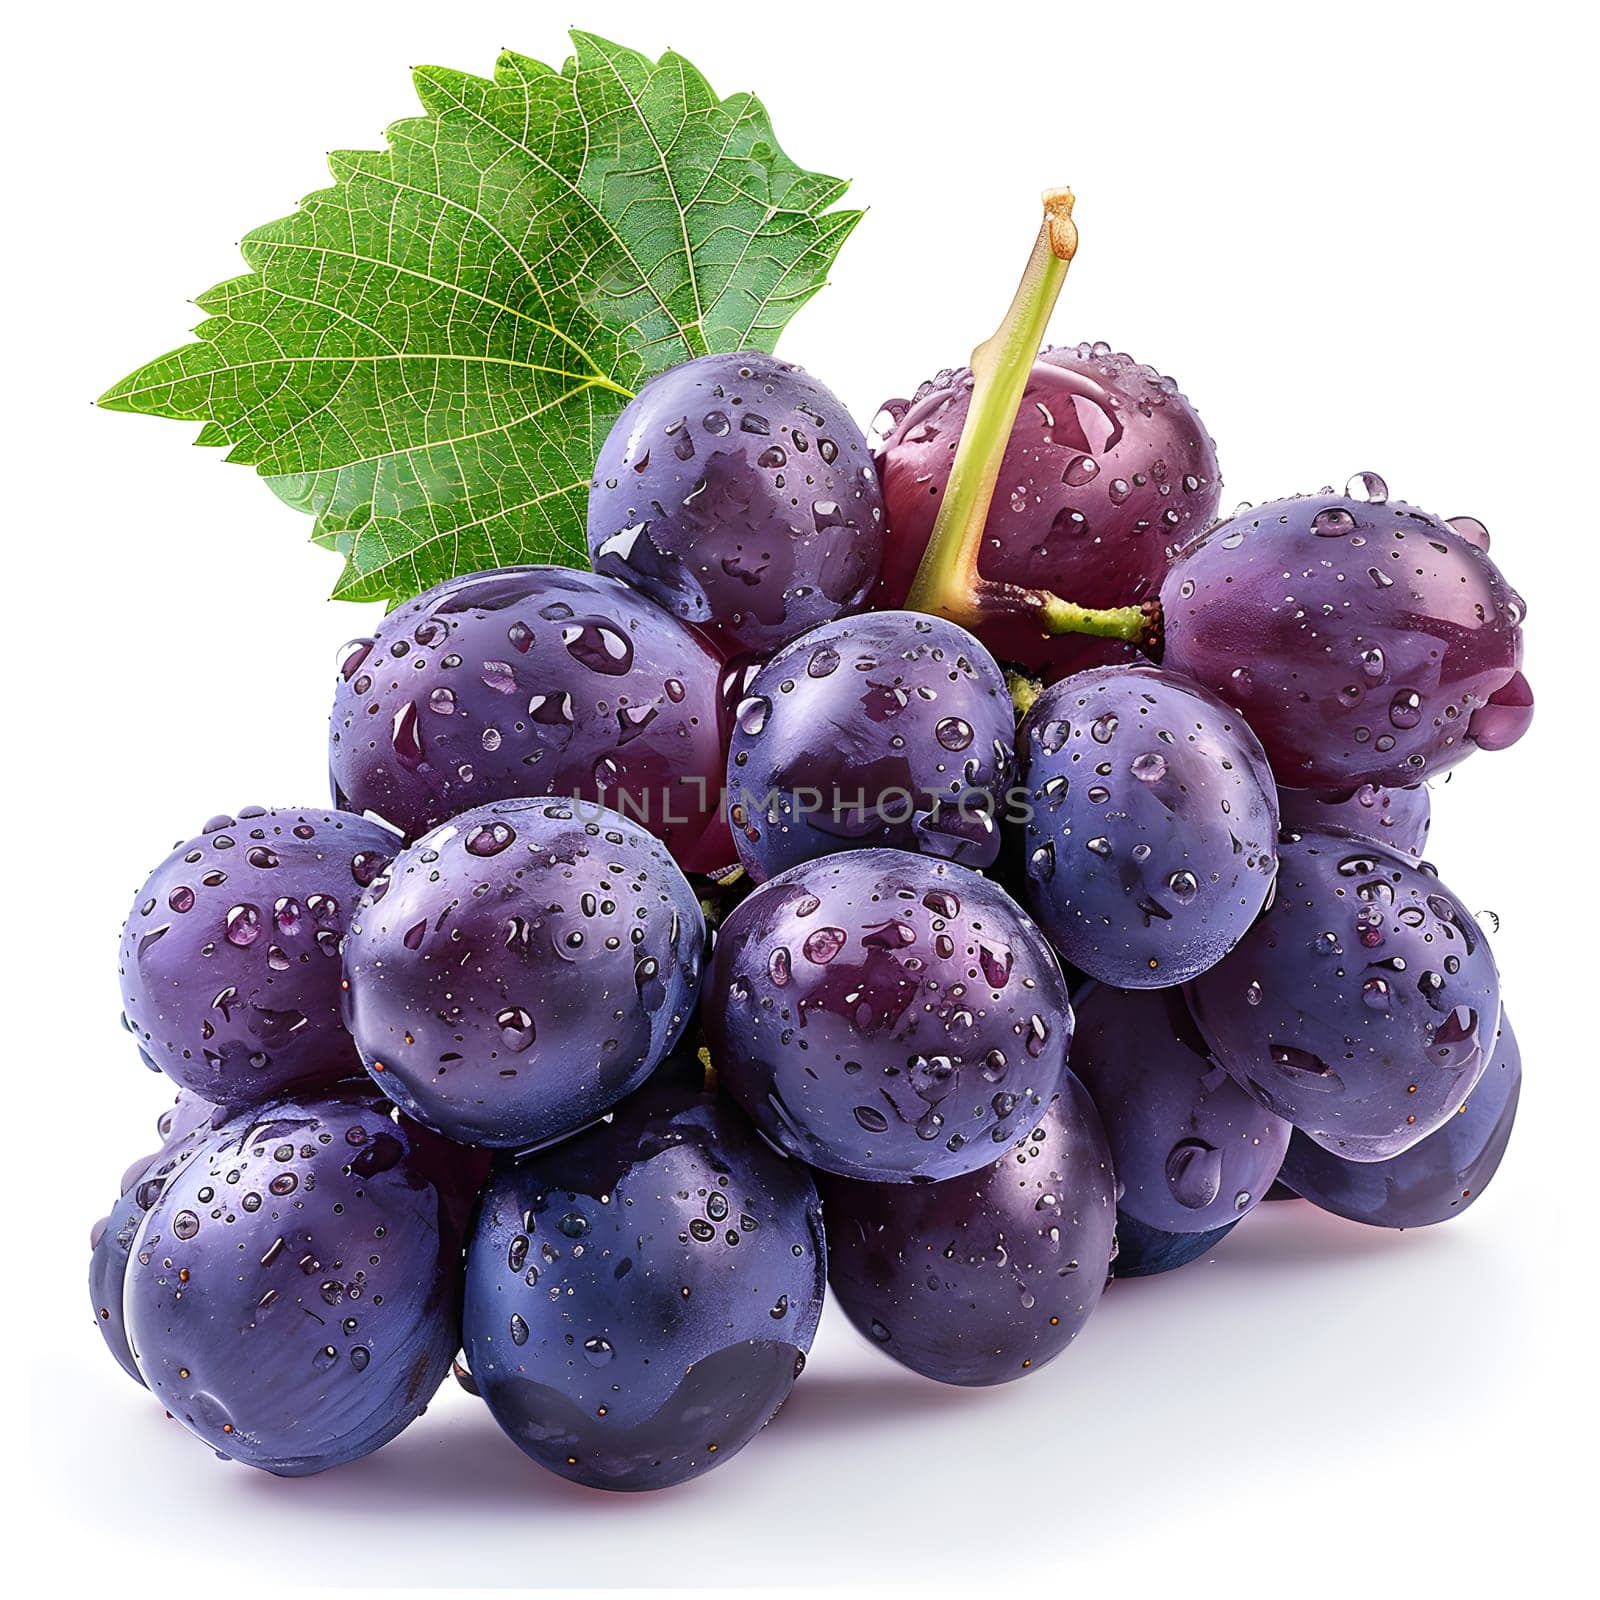 A bunch of purple grapes, a seedless fruit, with a green leaf on a white background. This natural food ingredient is a type of berry and a popular produce for tableware